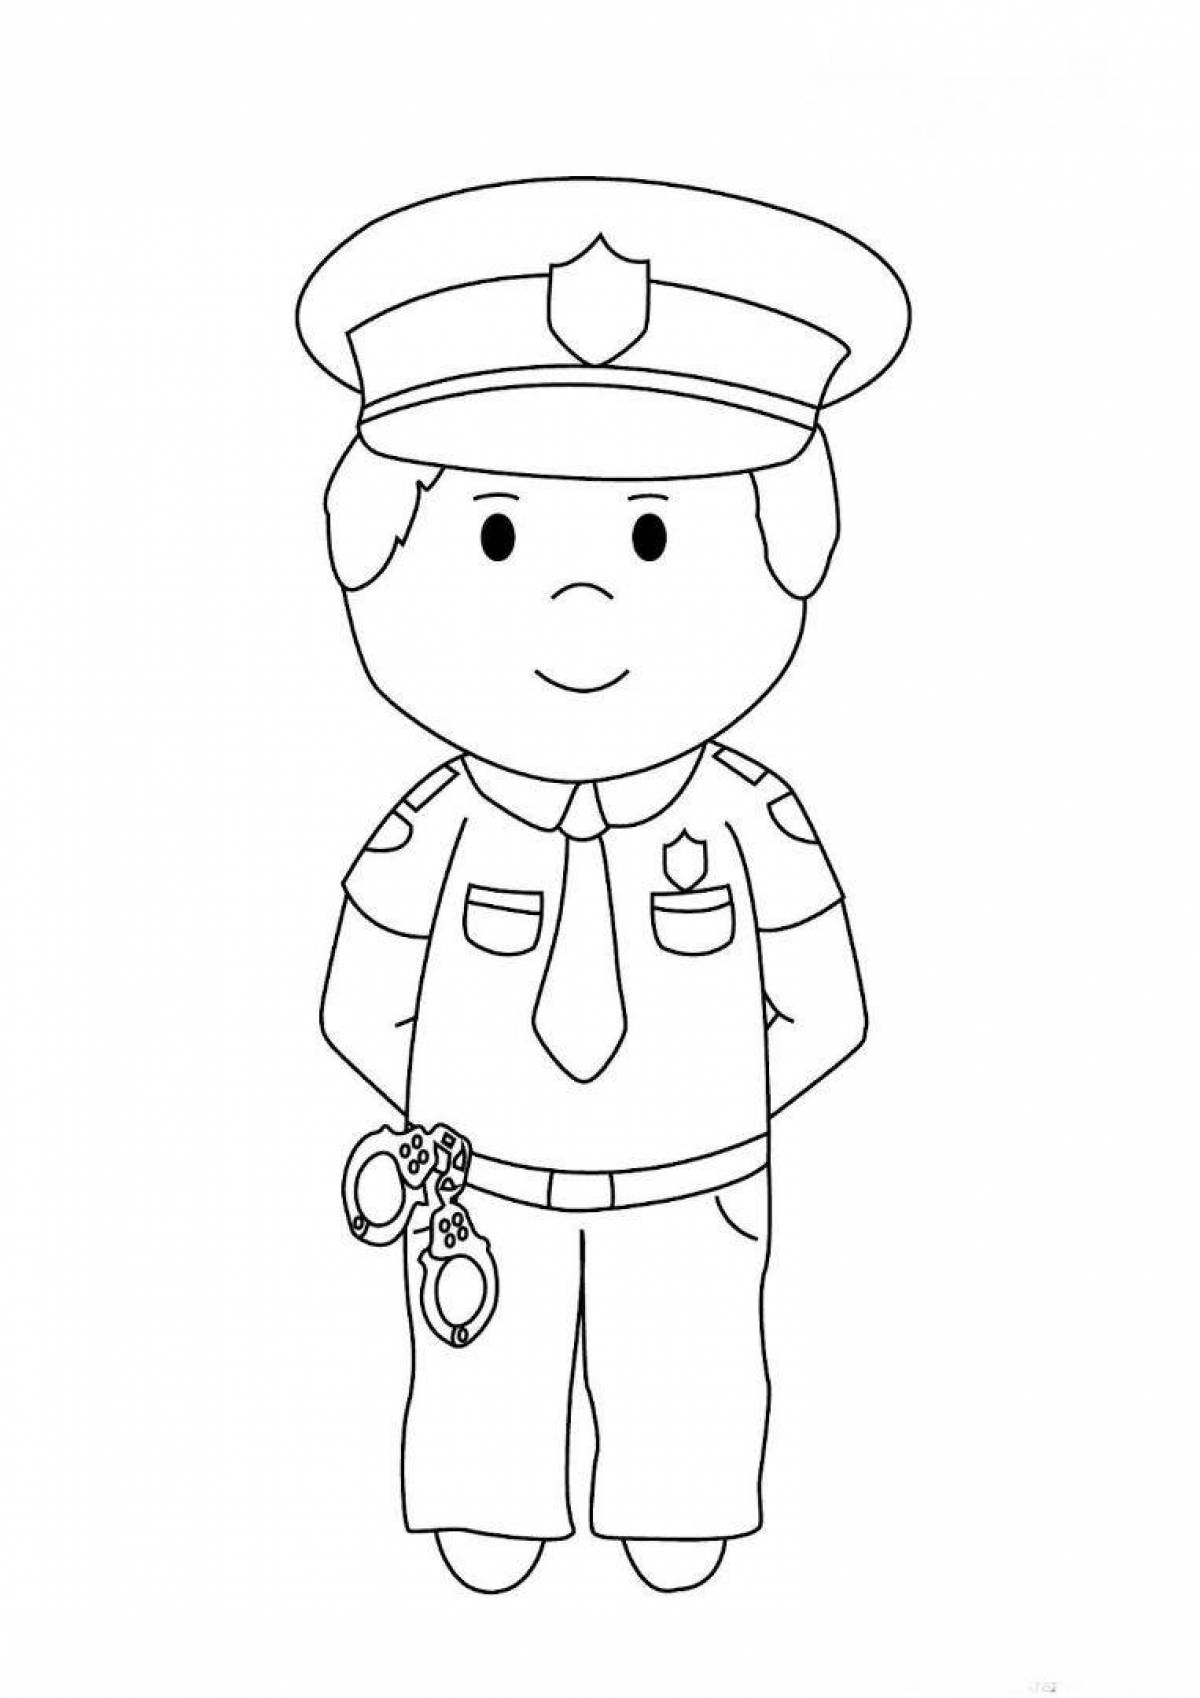 Cop coloring book for kids